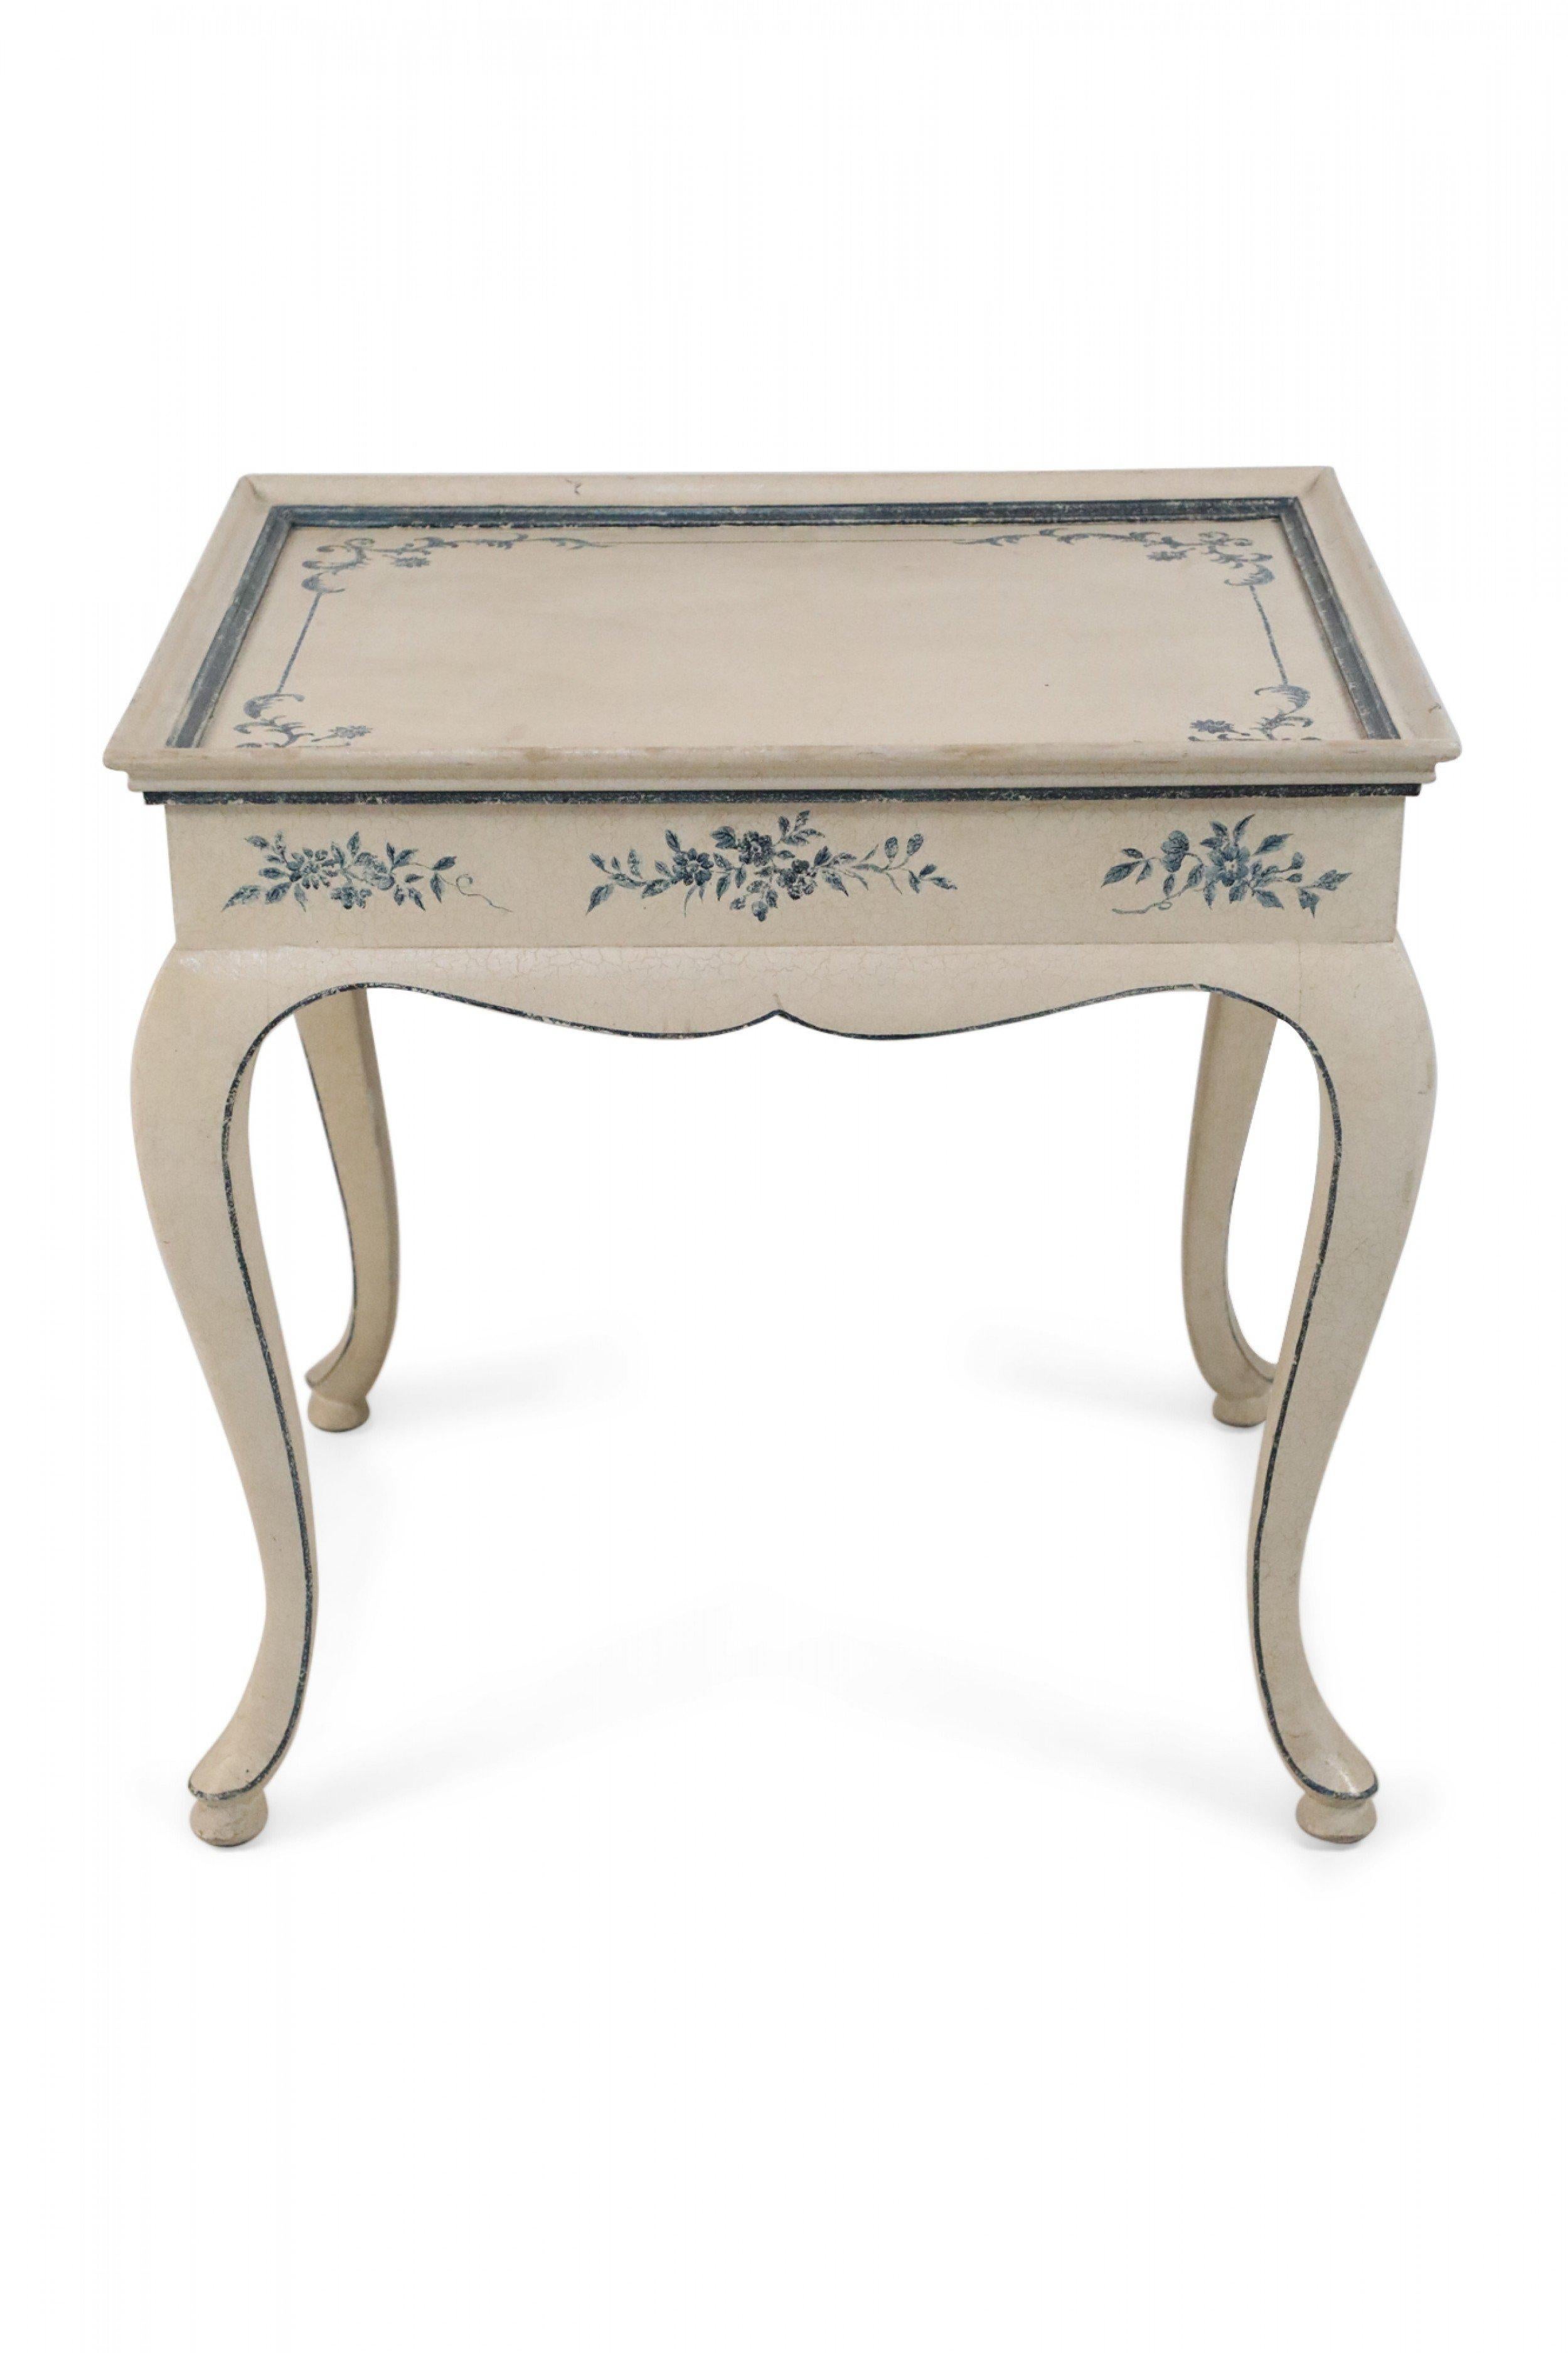 French Provincial Style Cream Wooden Center Table In Good Condition For Sale In New York, NY